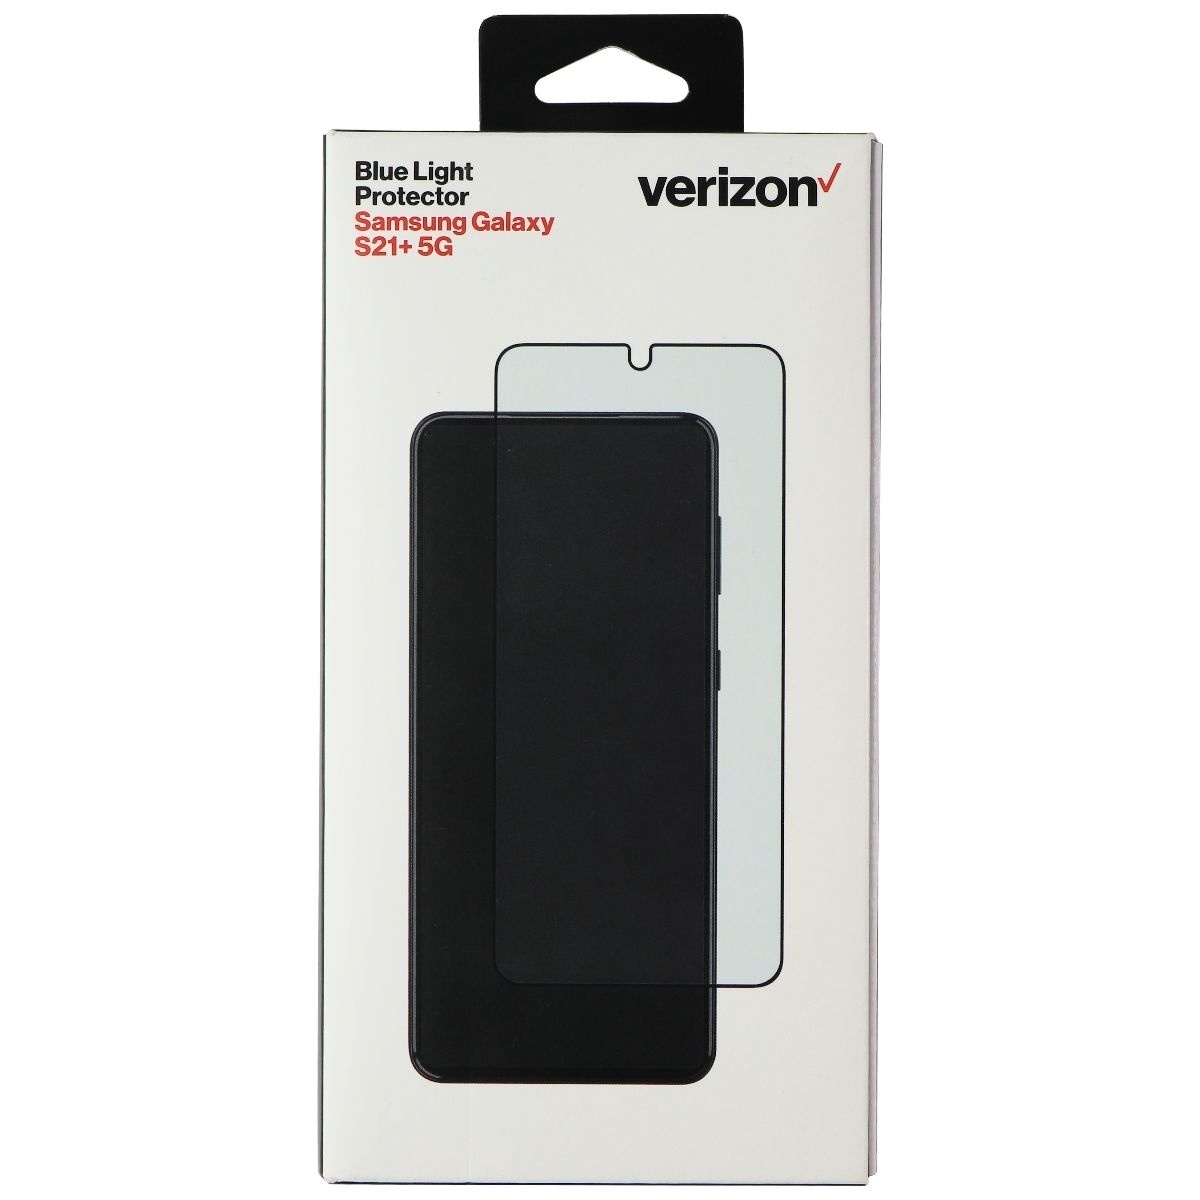 Verizon Blue Light Screen Protector For Samsung Galaxy S21+ 5G - Clear/Tinted